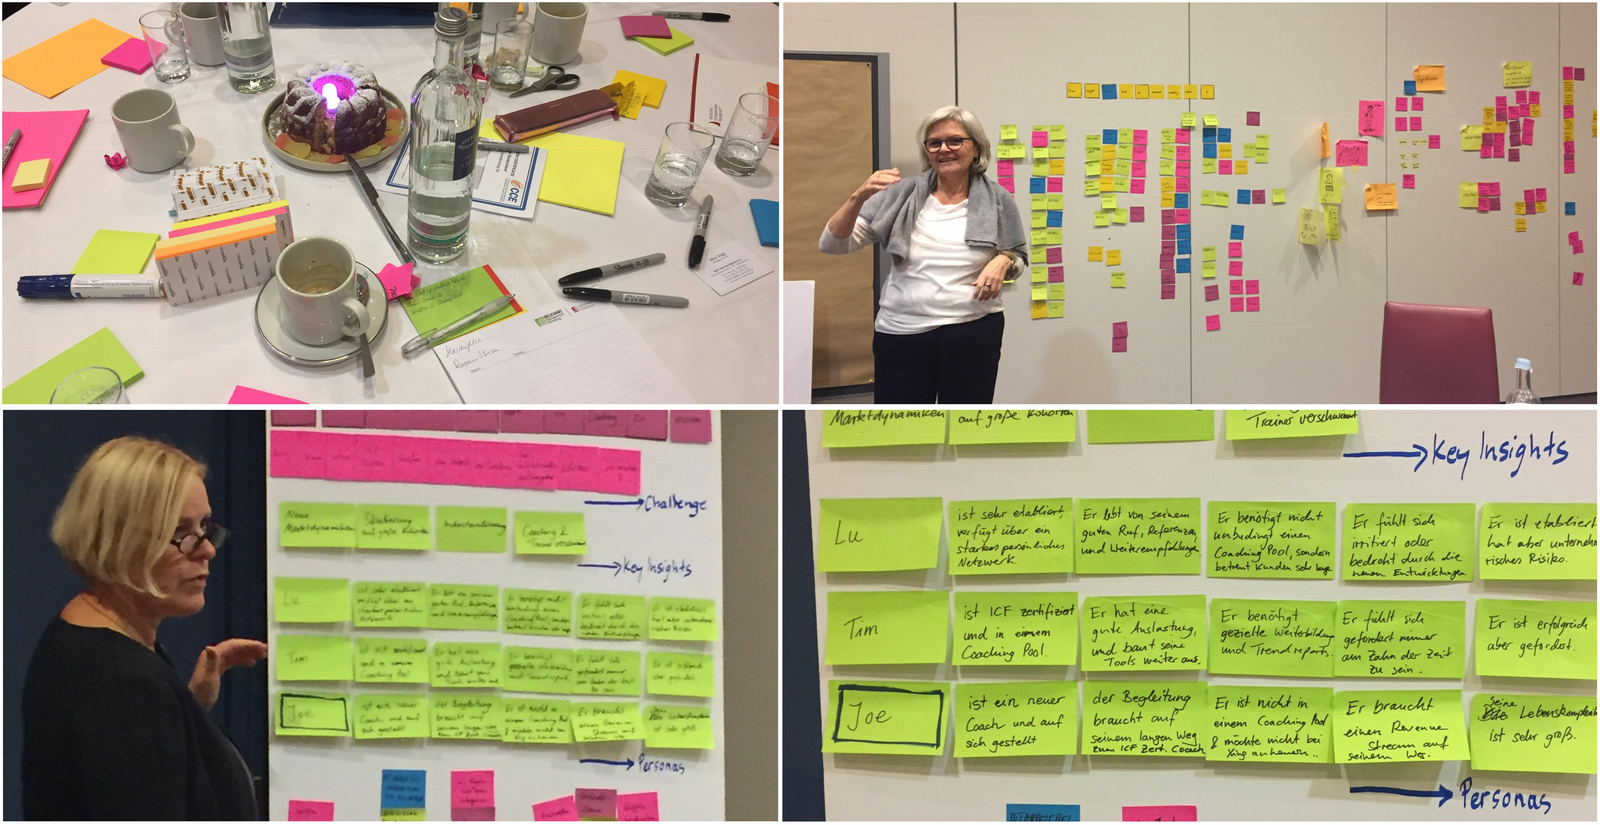 Impressions from Design Thinking Workshop at ICF coachingTAG 2018